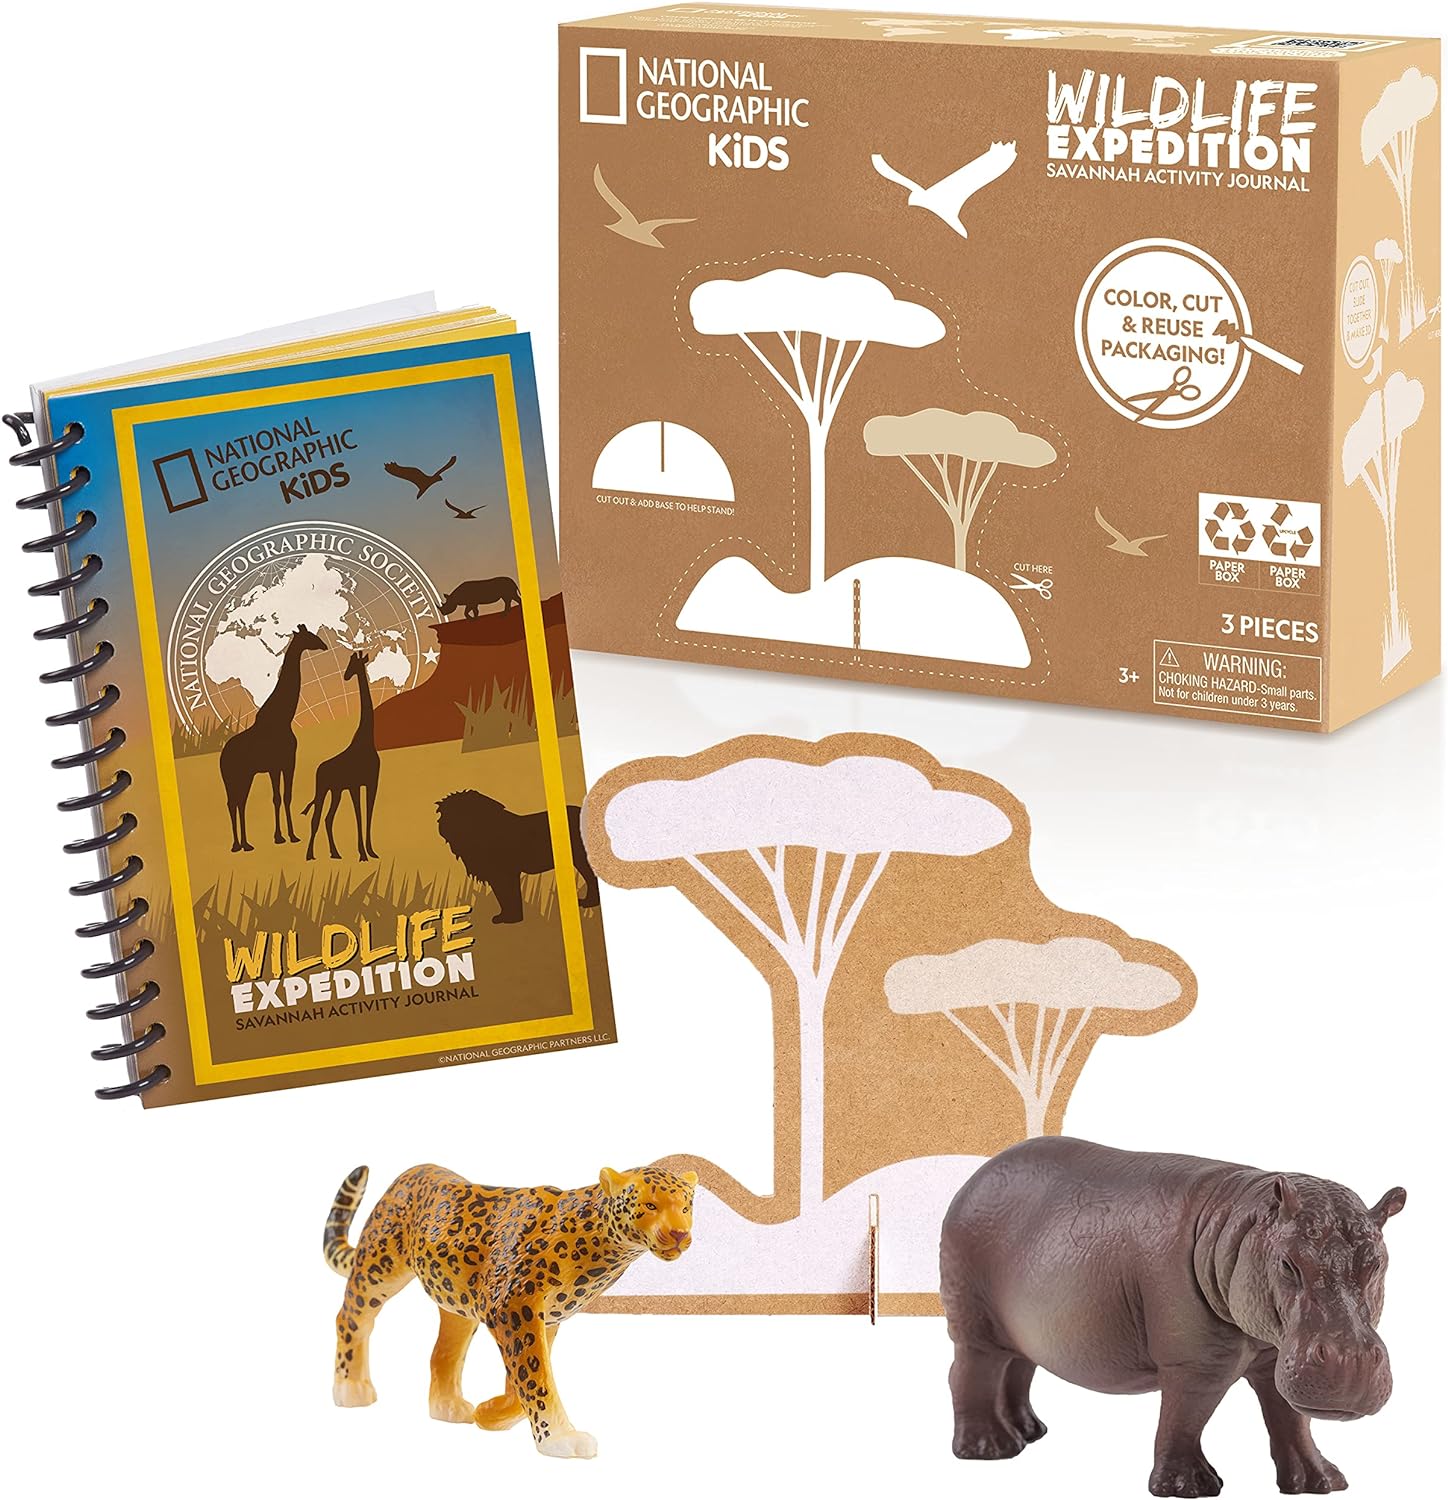 National Geographic Kids Activity Journal Set With Realistic Animal Toy Figures $4.49 + Free Ship w/Prime or on orders $35+